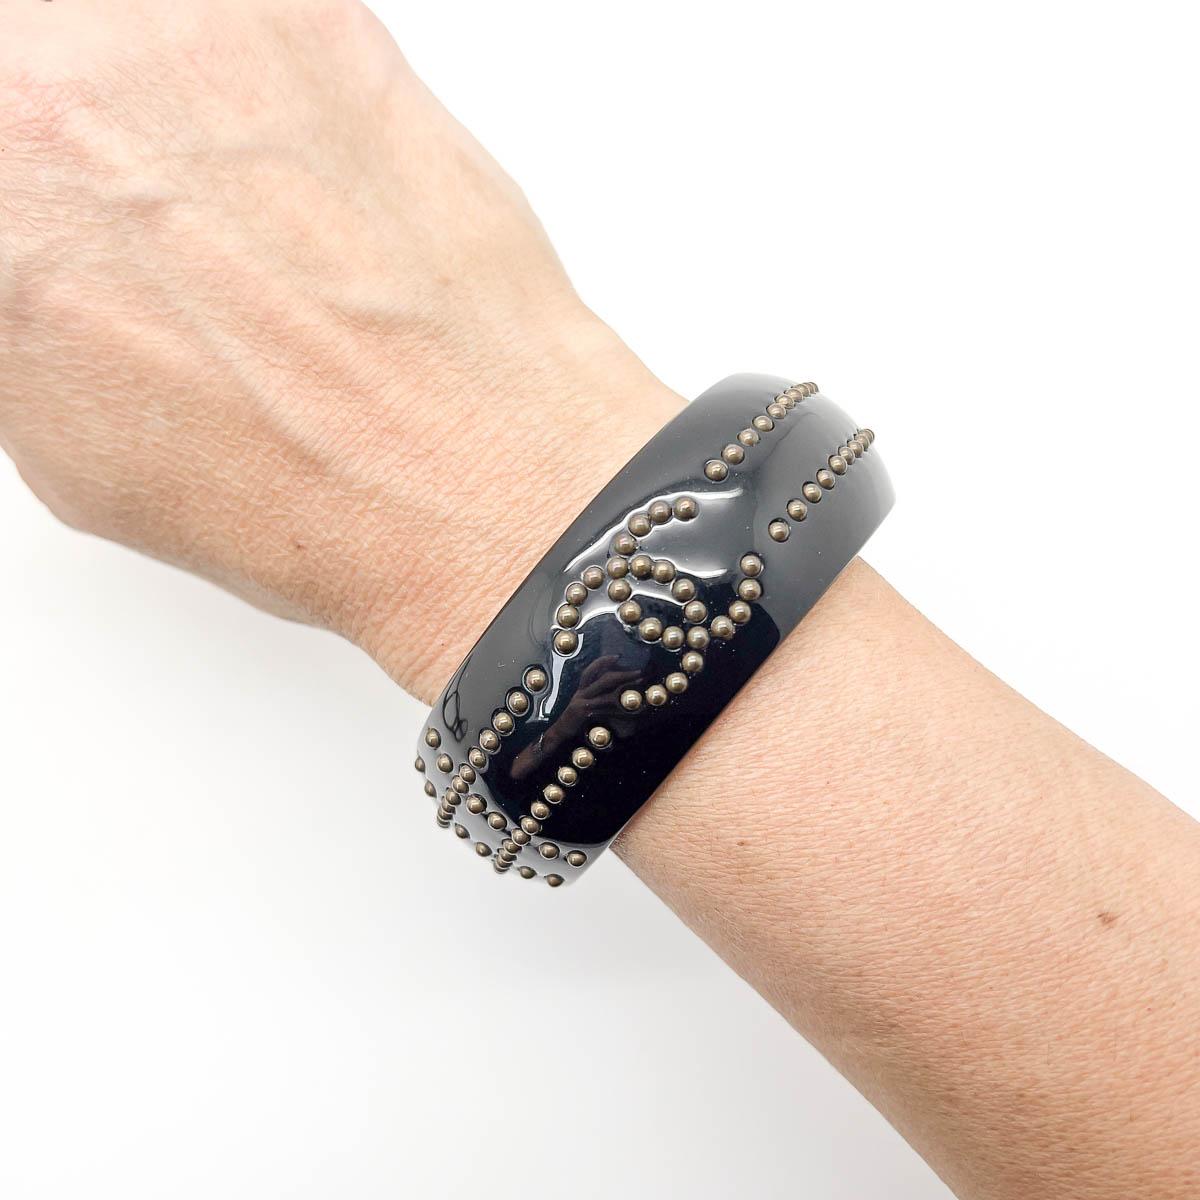 A super cool vintage Chanel studded bangle crafted in 2007. Perfect for stacking or alone.

Vintage Condition: Very good without damage or noteworthy wear.
Signed: Chanel, 2007
Materials: Resin, metal studwork
Fastening: none
Approximate Dimensions: